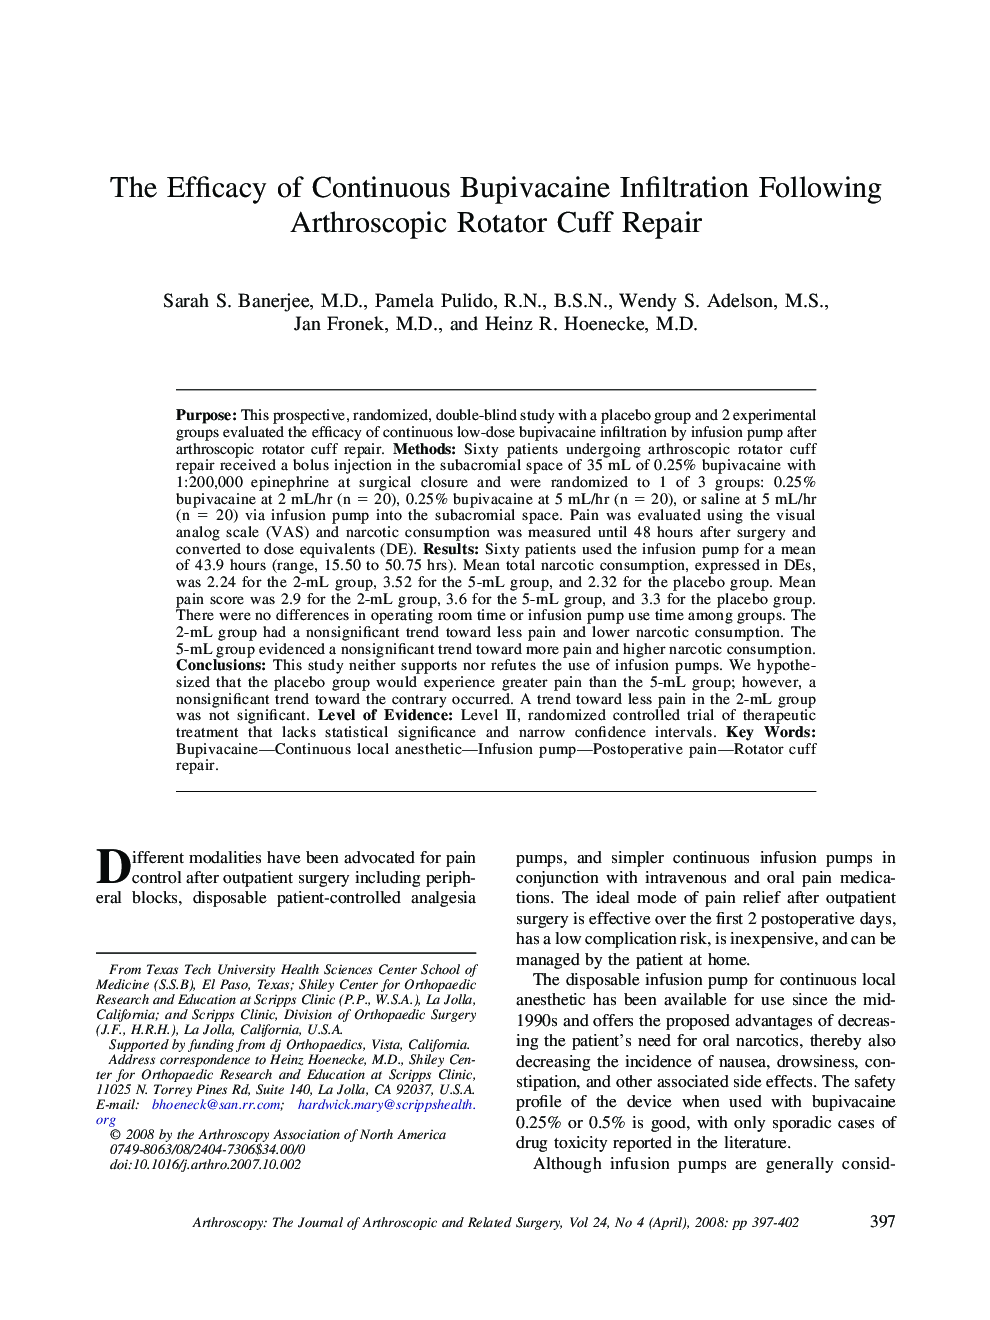 The Efficacy of Continuous Bupivacaine Infiltration Following Arthroscopic Rotator Cuff Repair 